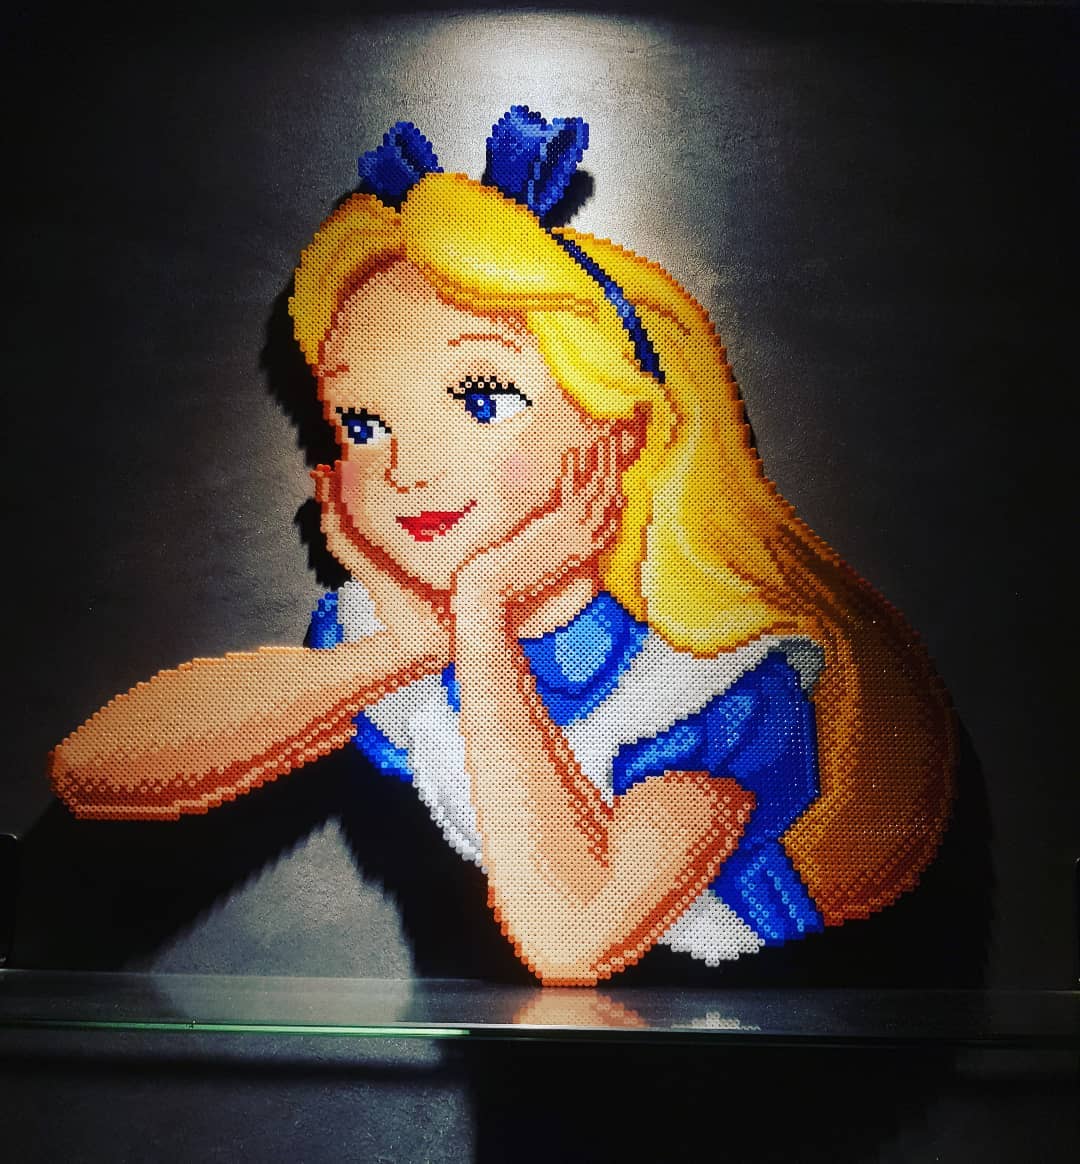 Artkal Beads on X: 2.6MM mini beads: 'Alice in the wonderland' by